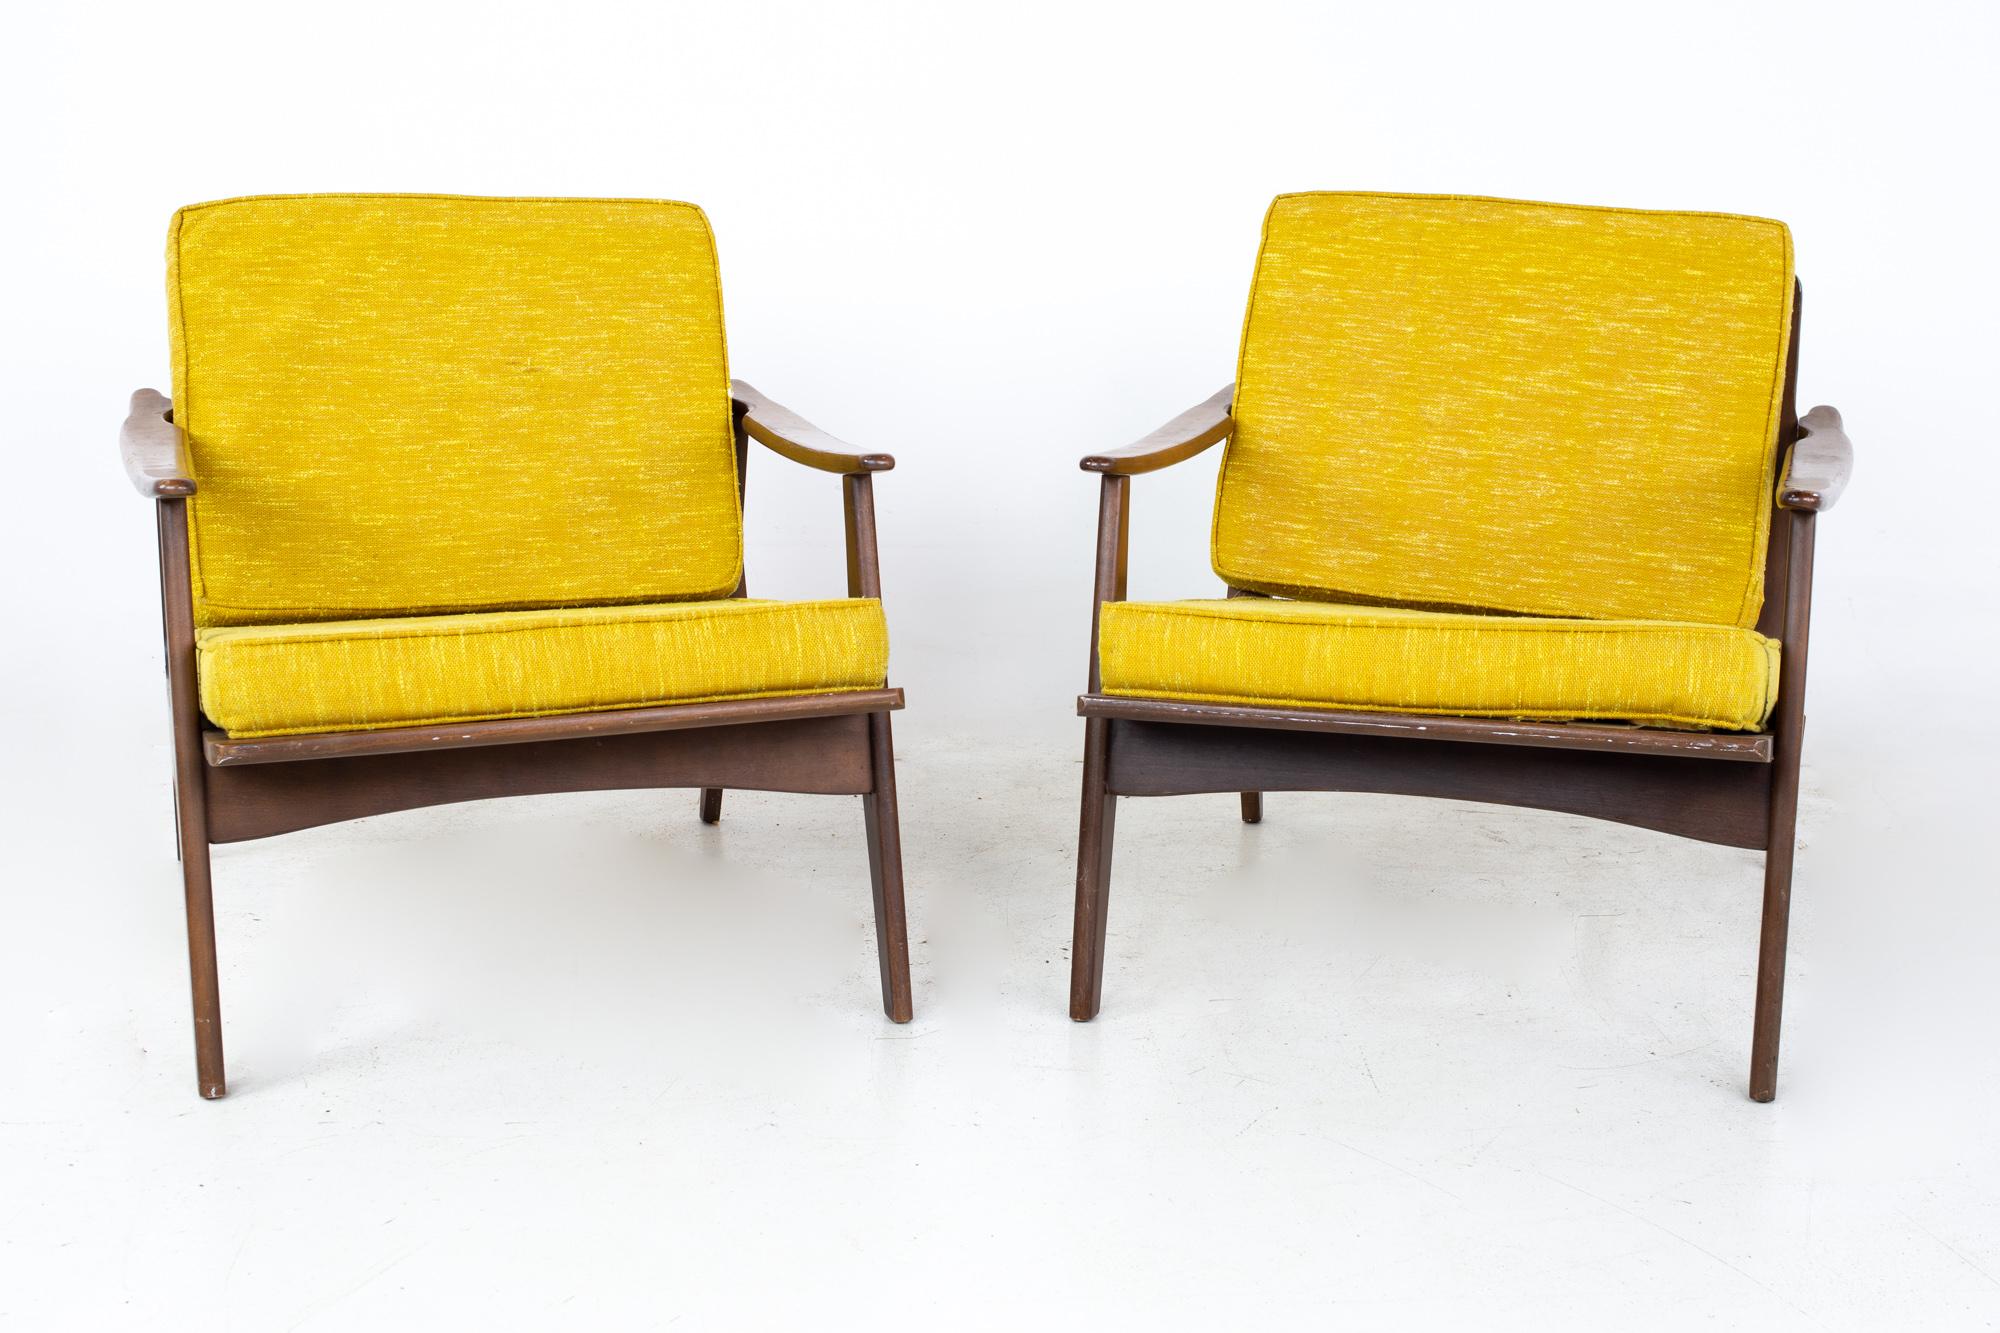 Otto Gerdau mid century Italian walnut lounge chairs - a pair

Each chair measures: 25 wide x 31 deep x 29 high, with a seat height of 13.5 inches and arm height/chair clearance of 20.25 inches

All pieces of furniture can be had in what we call